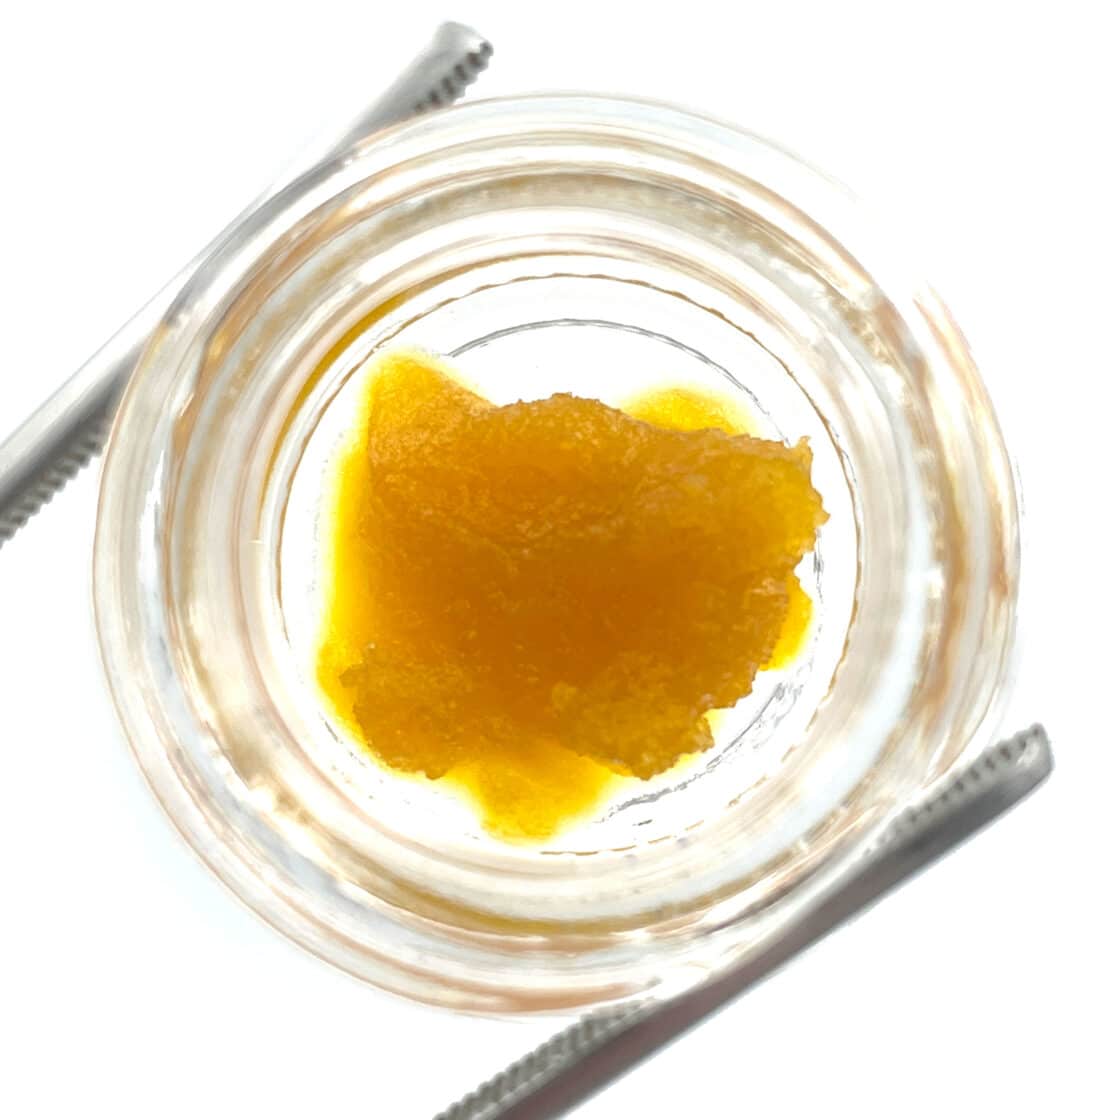 High voltage extracts – live sauce